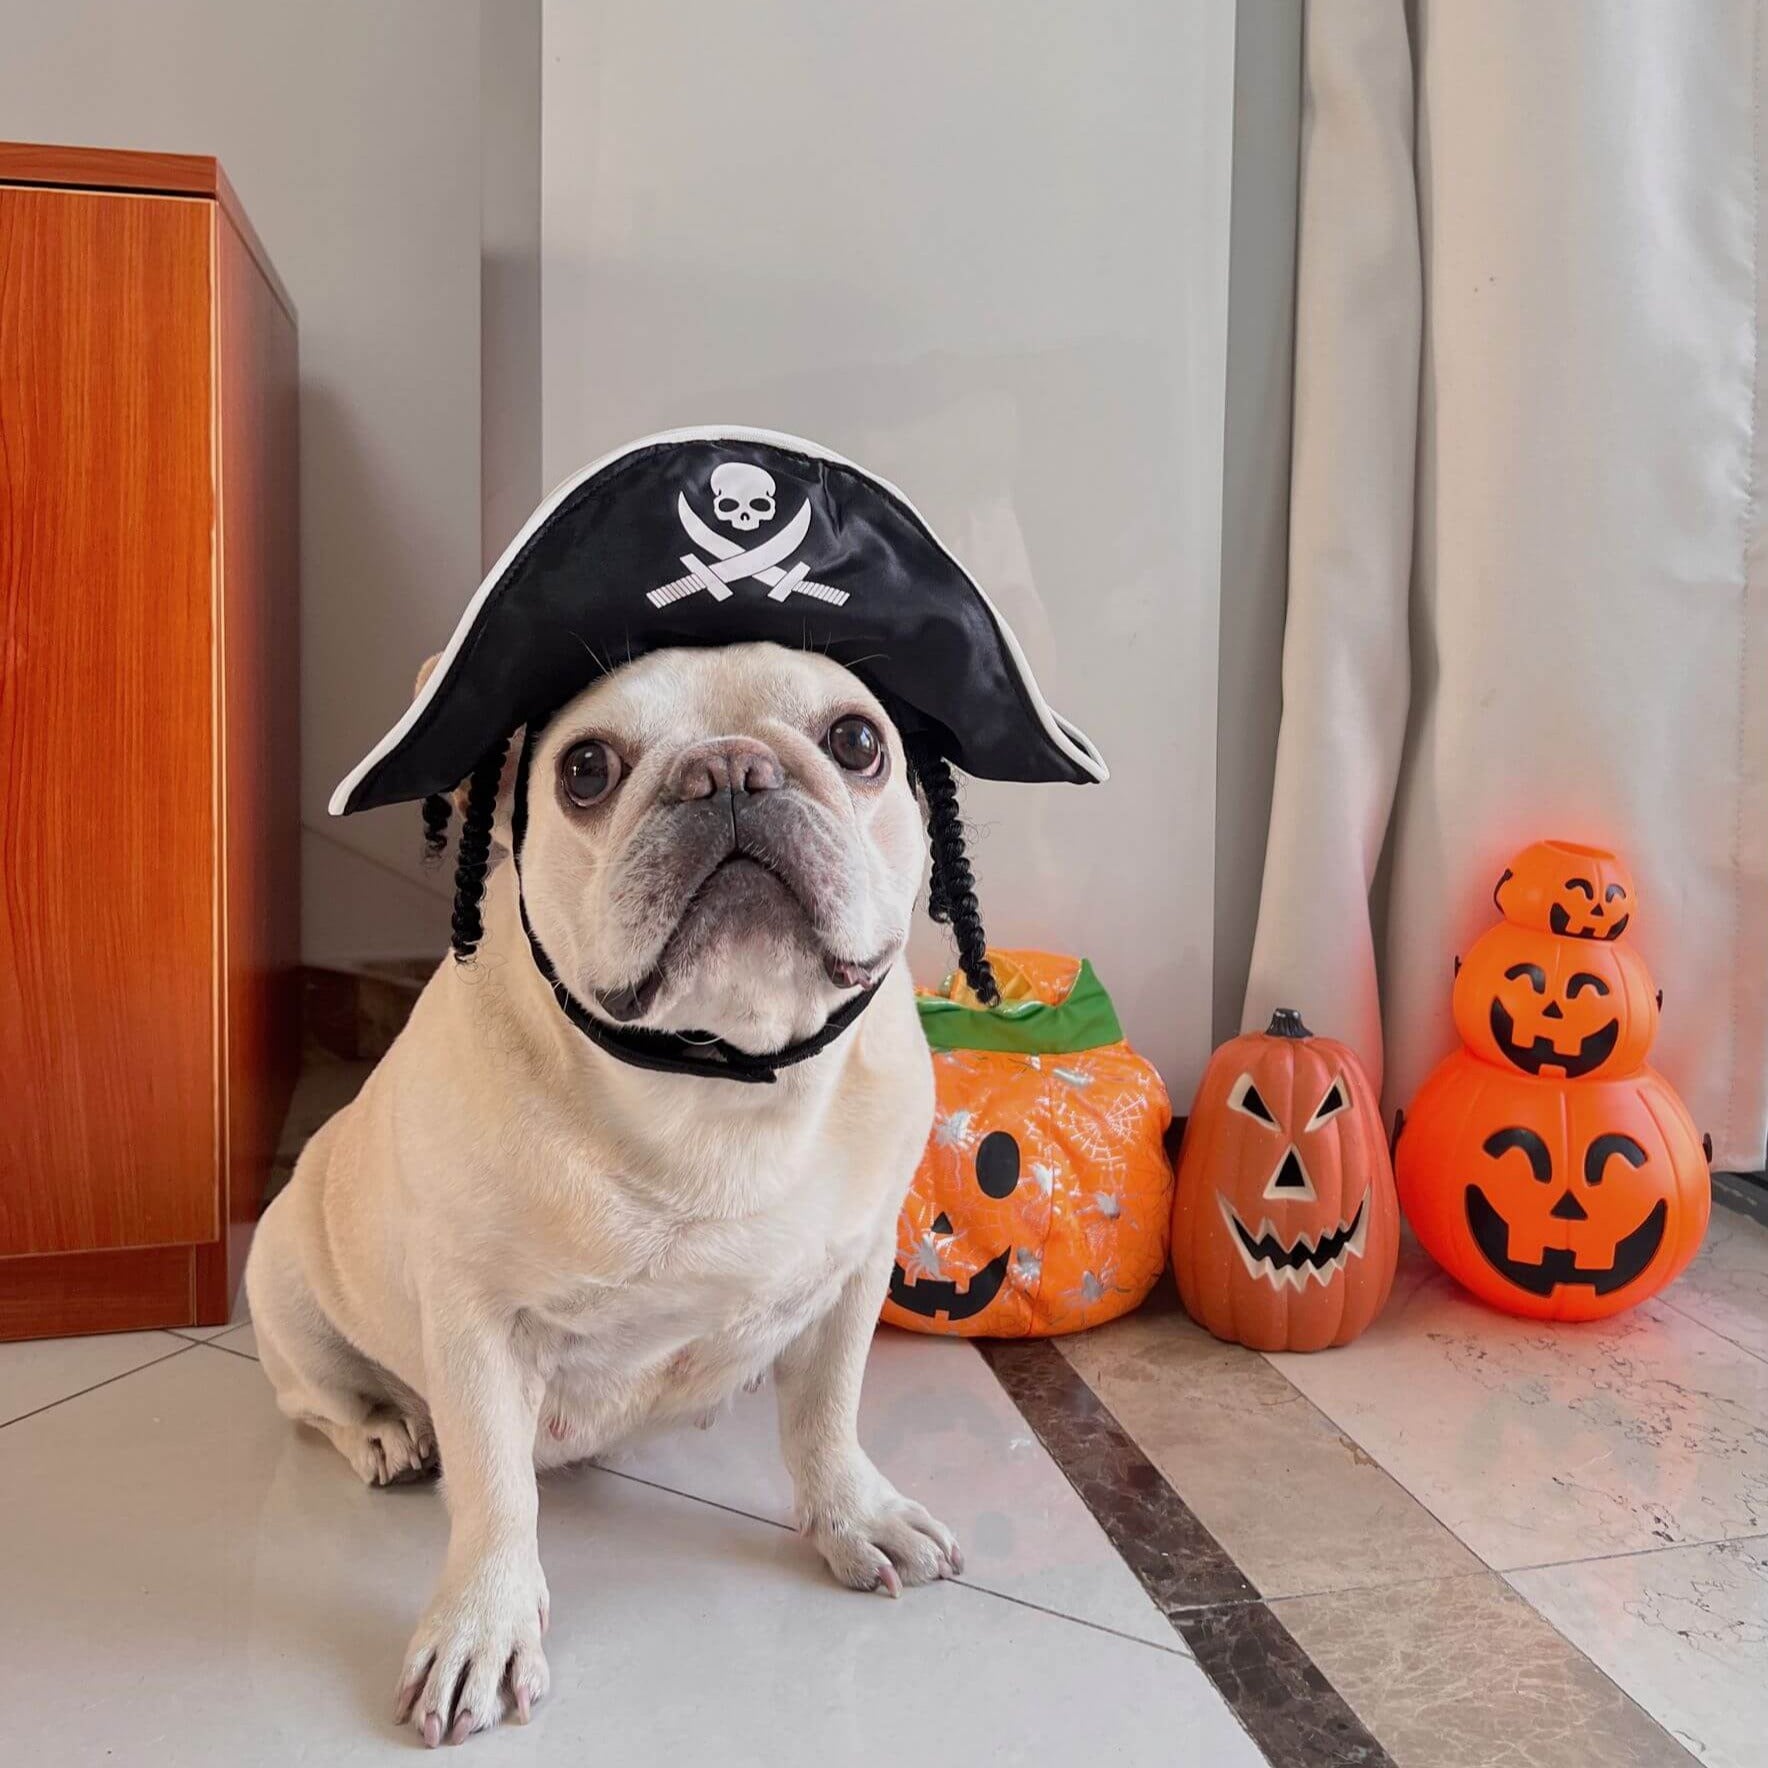 dog pirate costume with eye patch